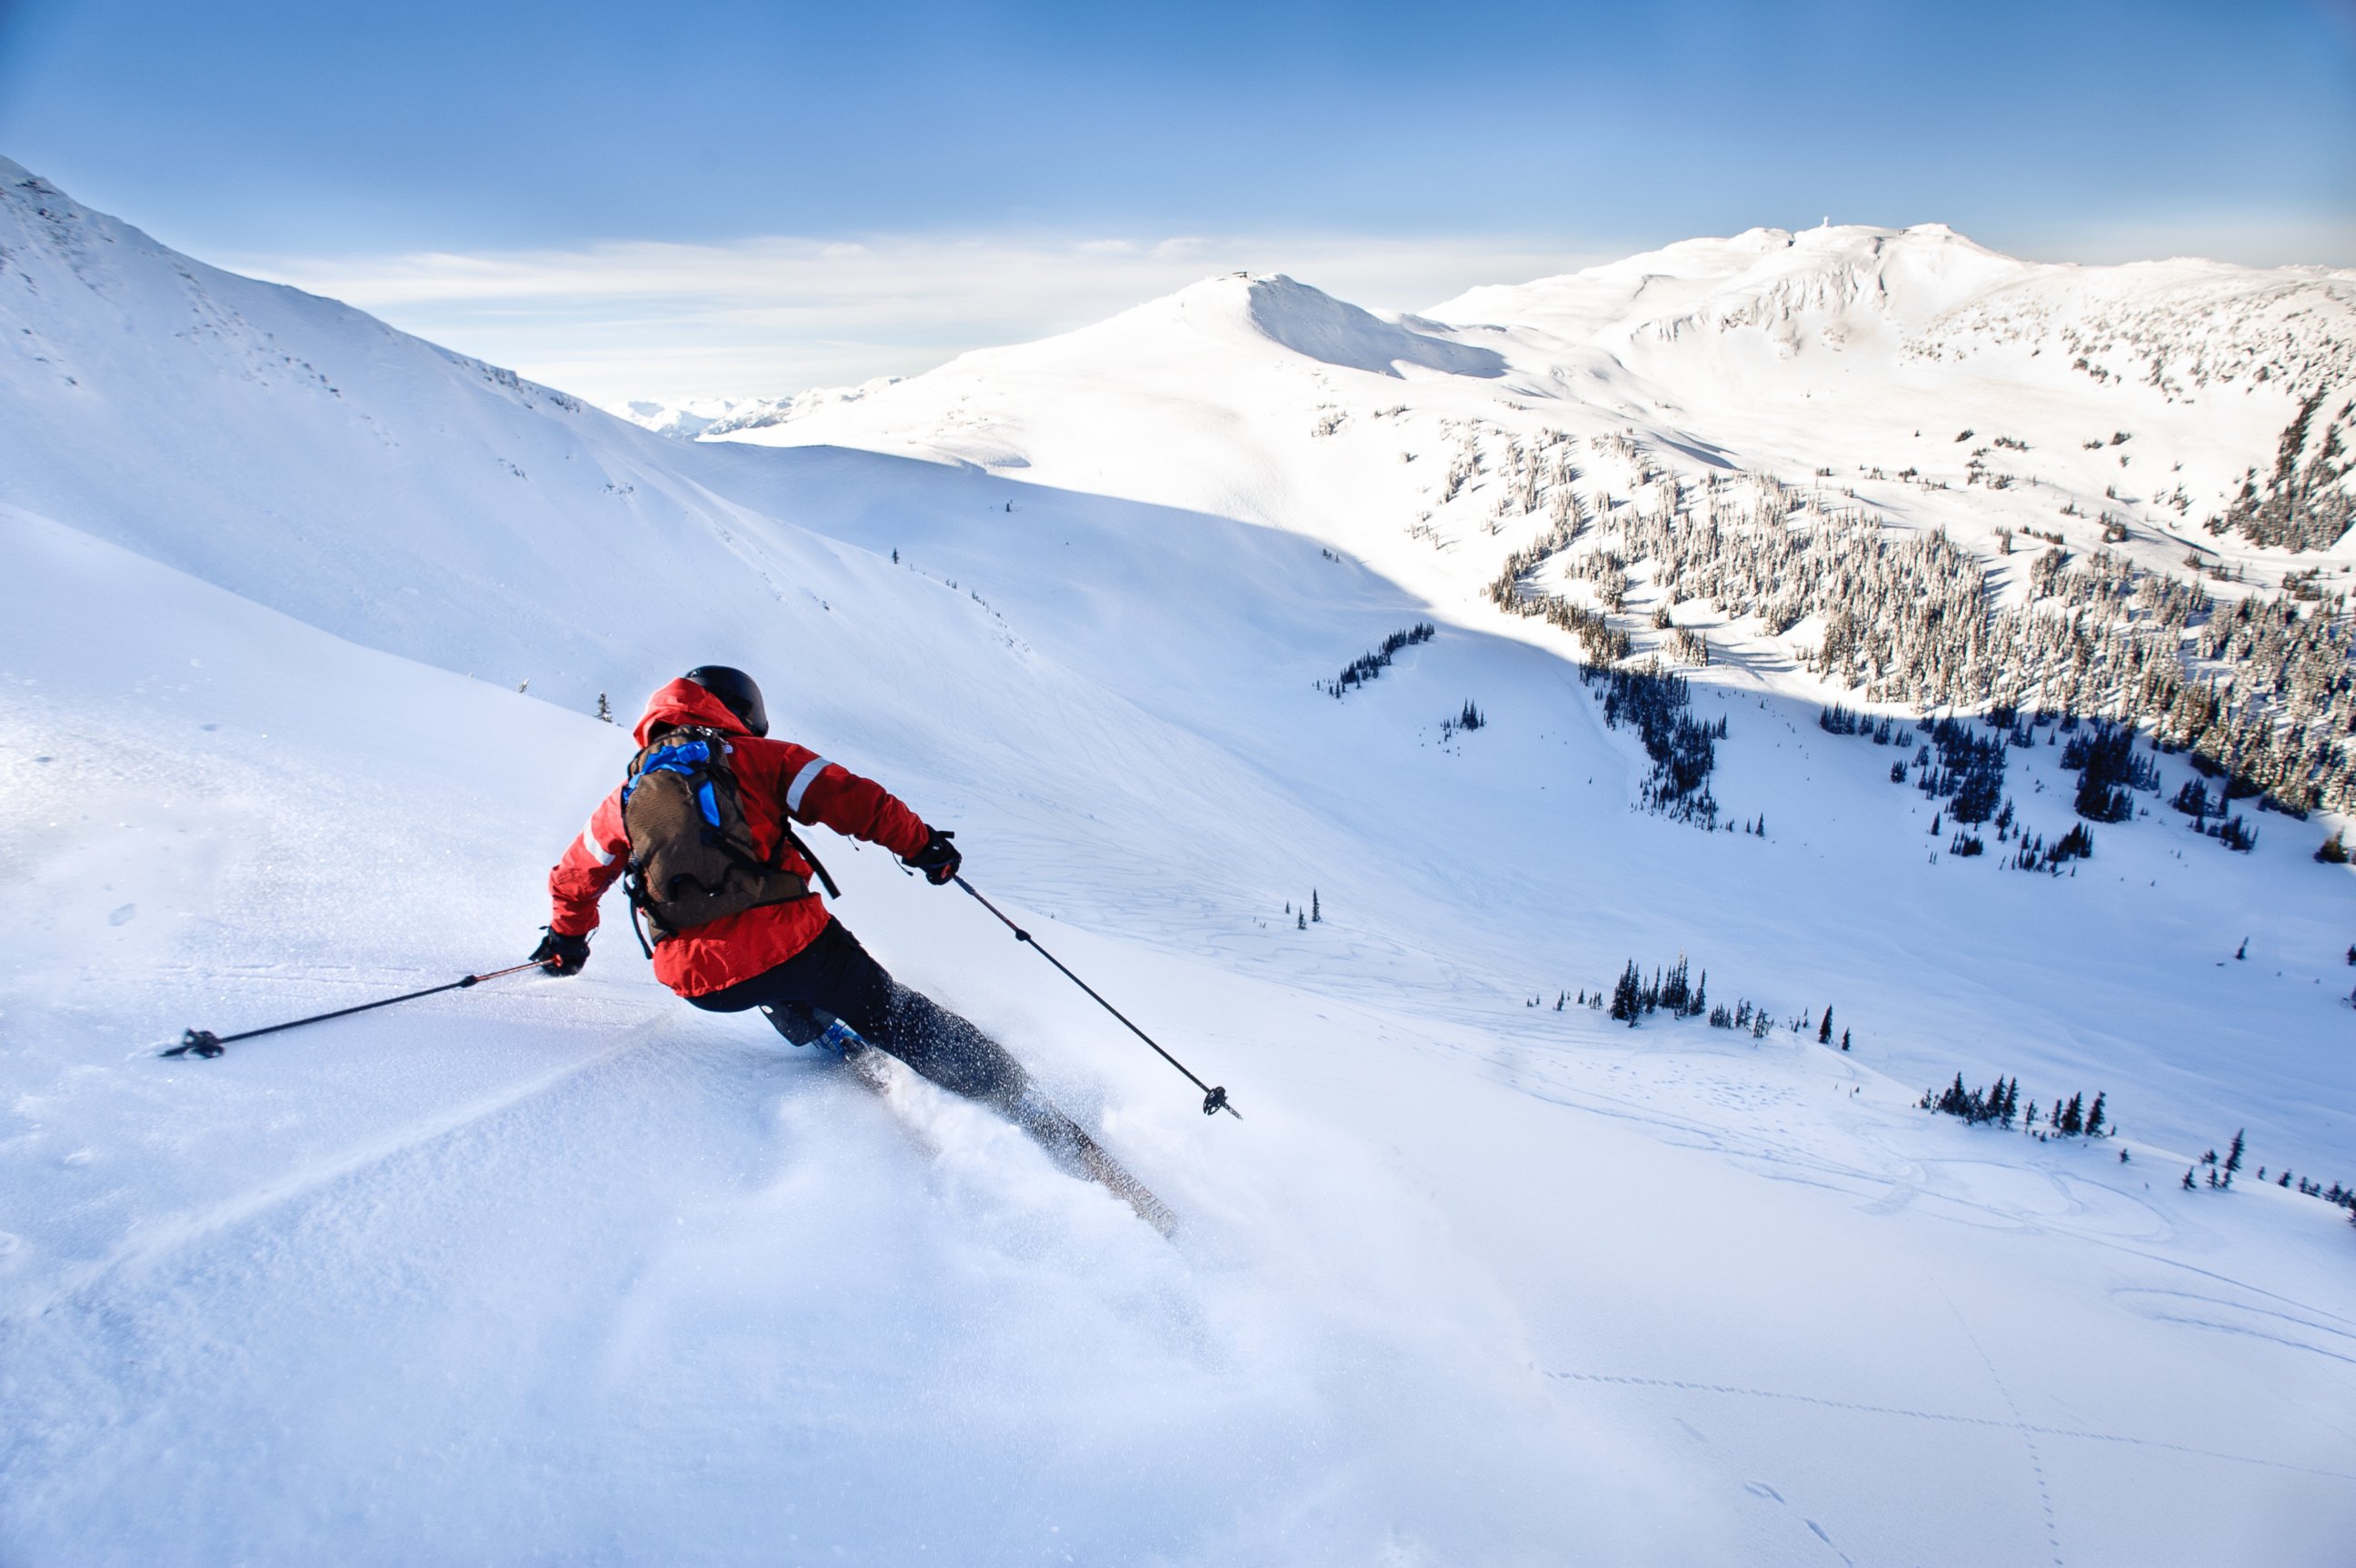 PHOTO: A person skiing is pictured in this stock photo. 